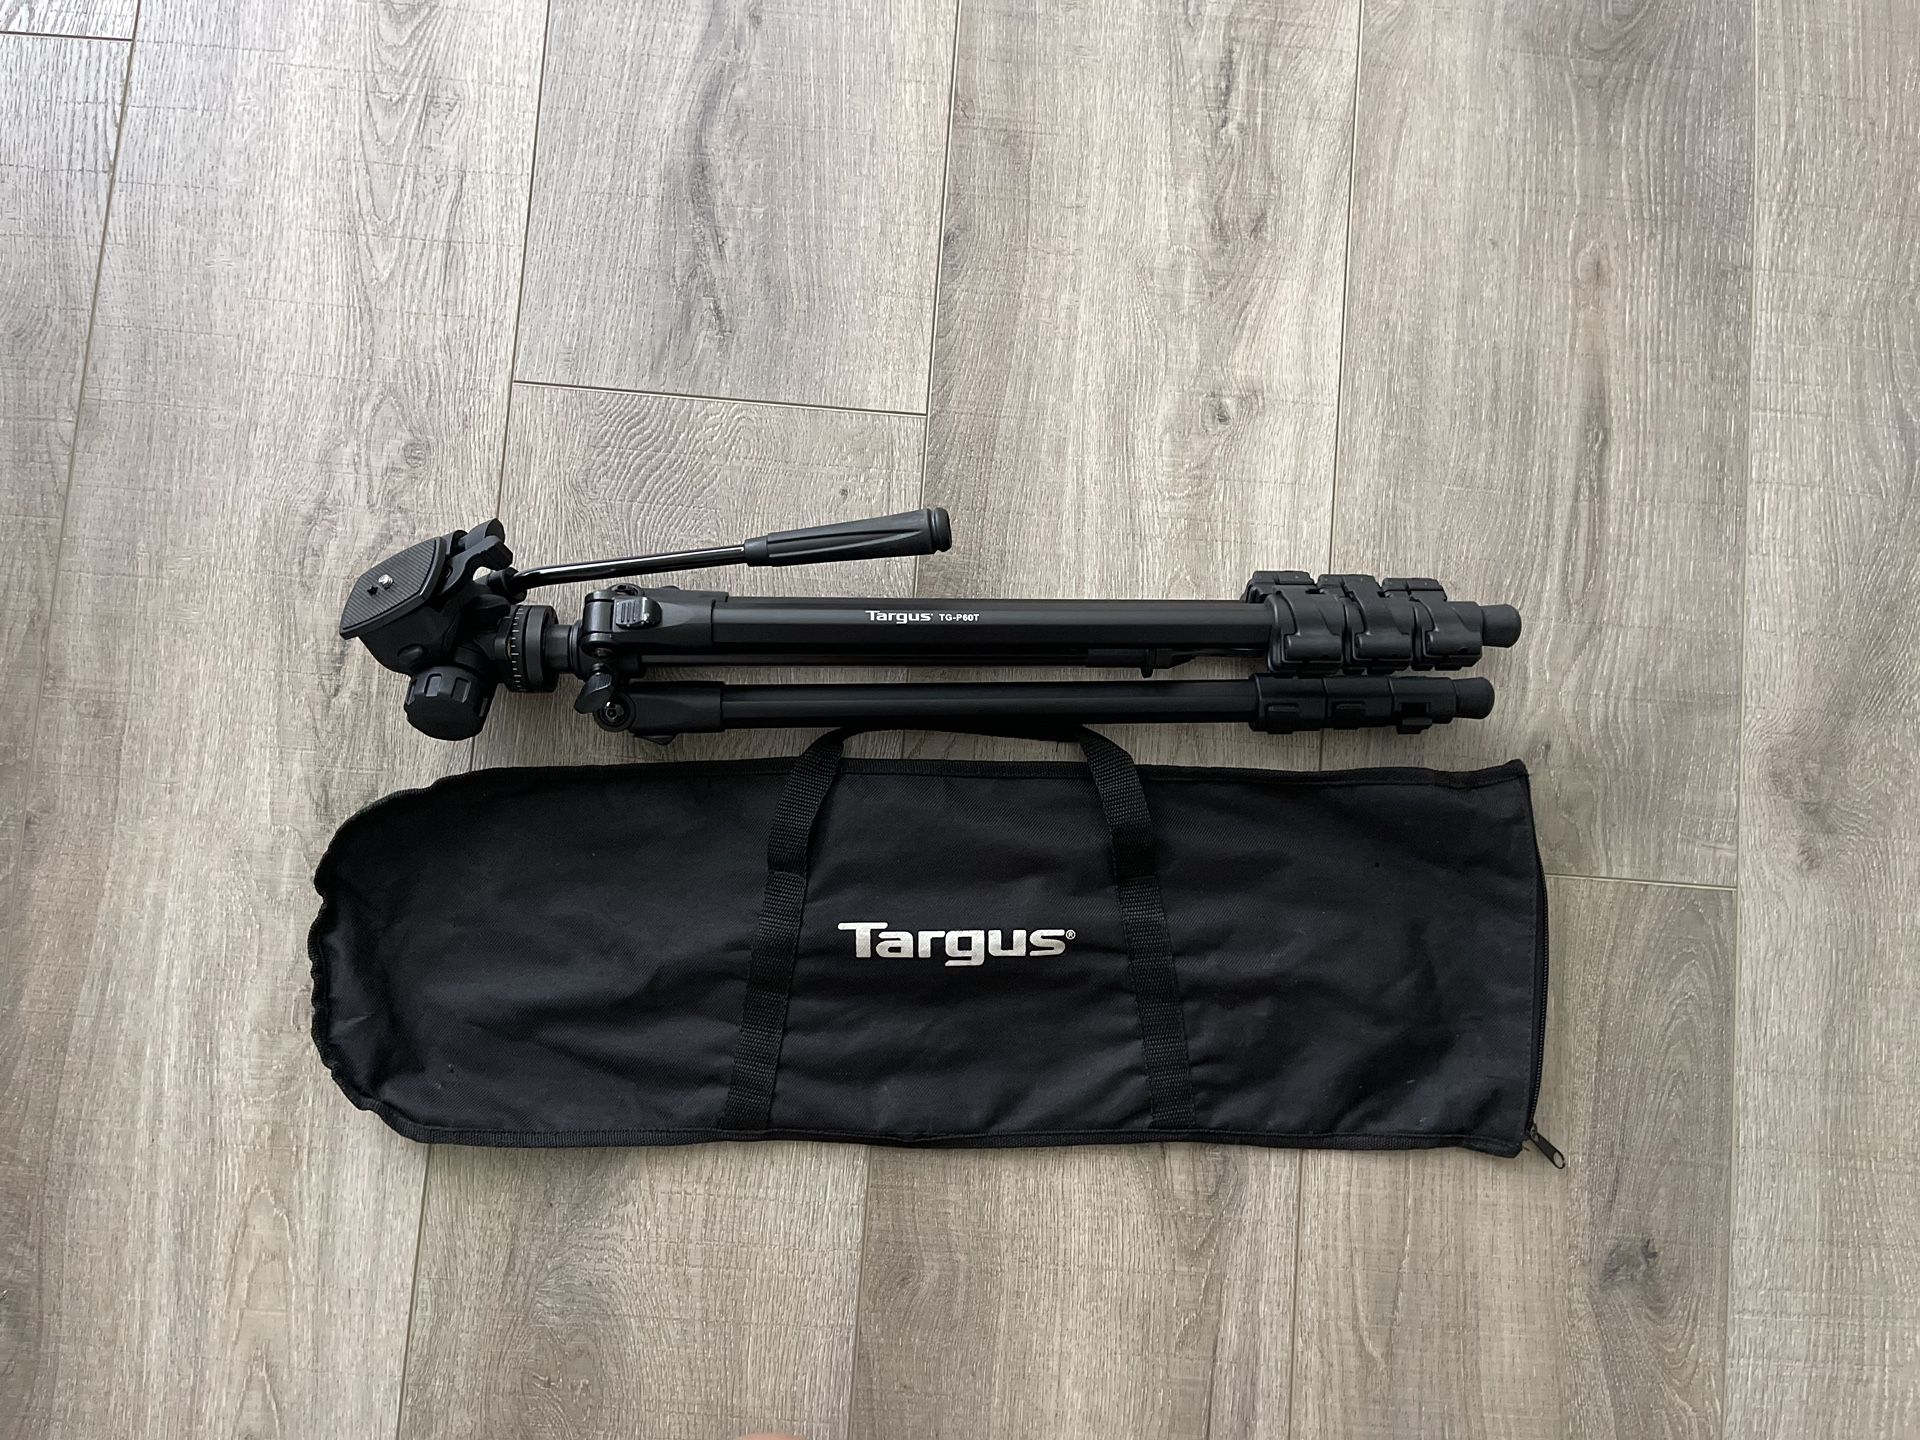 TARGUS Pro Series Black TG-P60T TRIPOD With Carrying Case